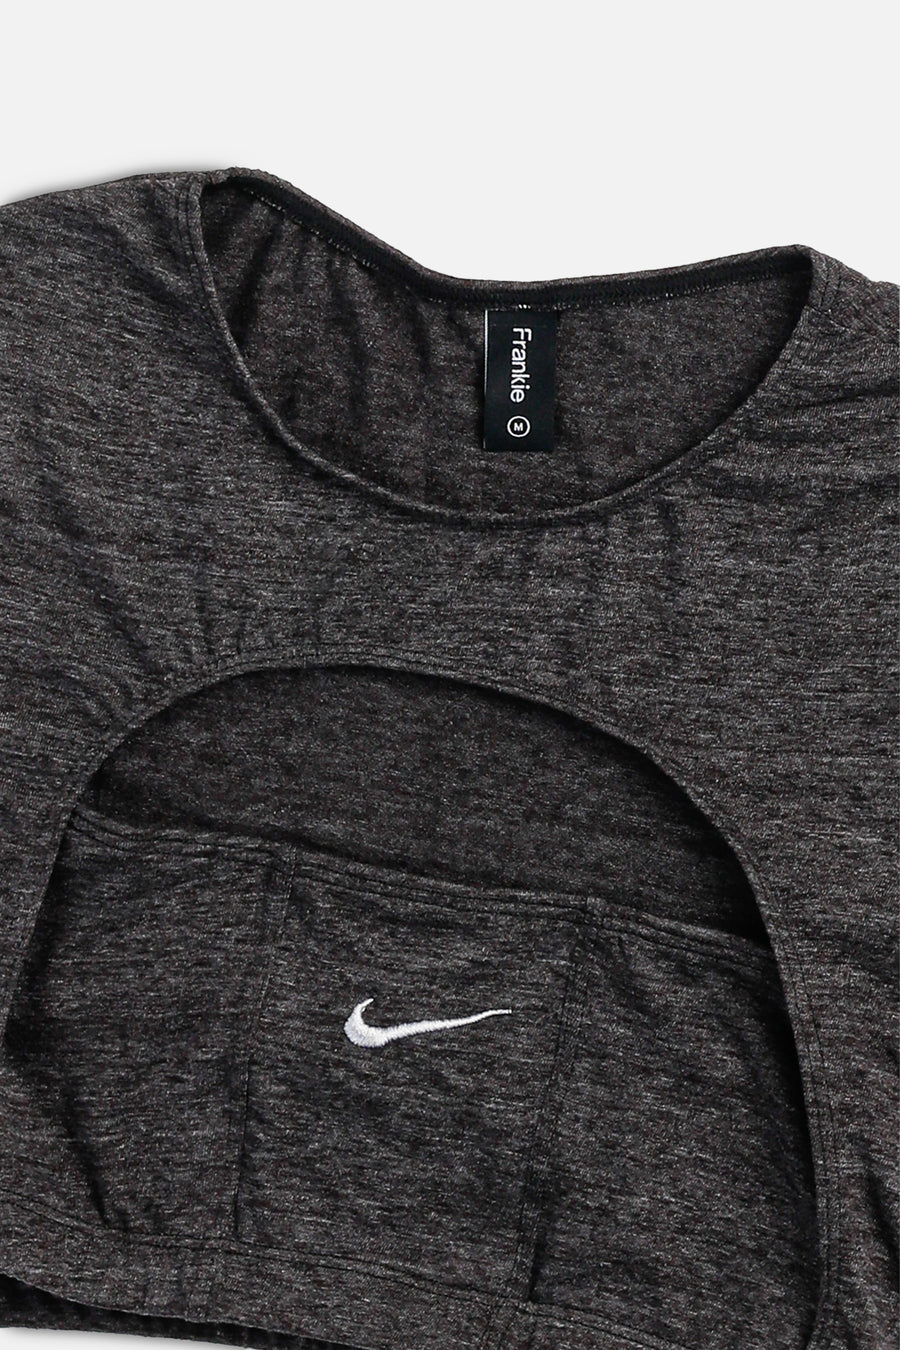 Rework Nike Cut Out Tee - M